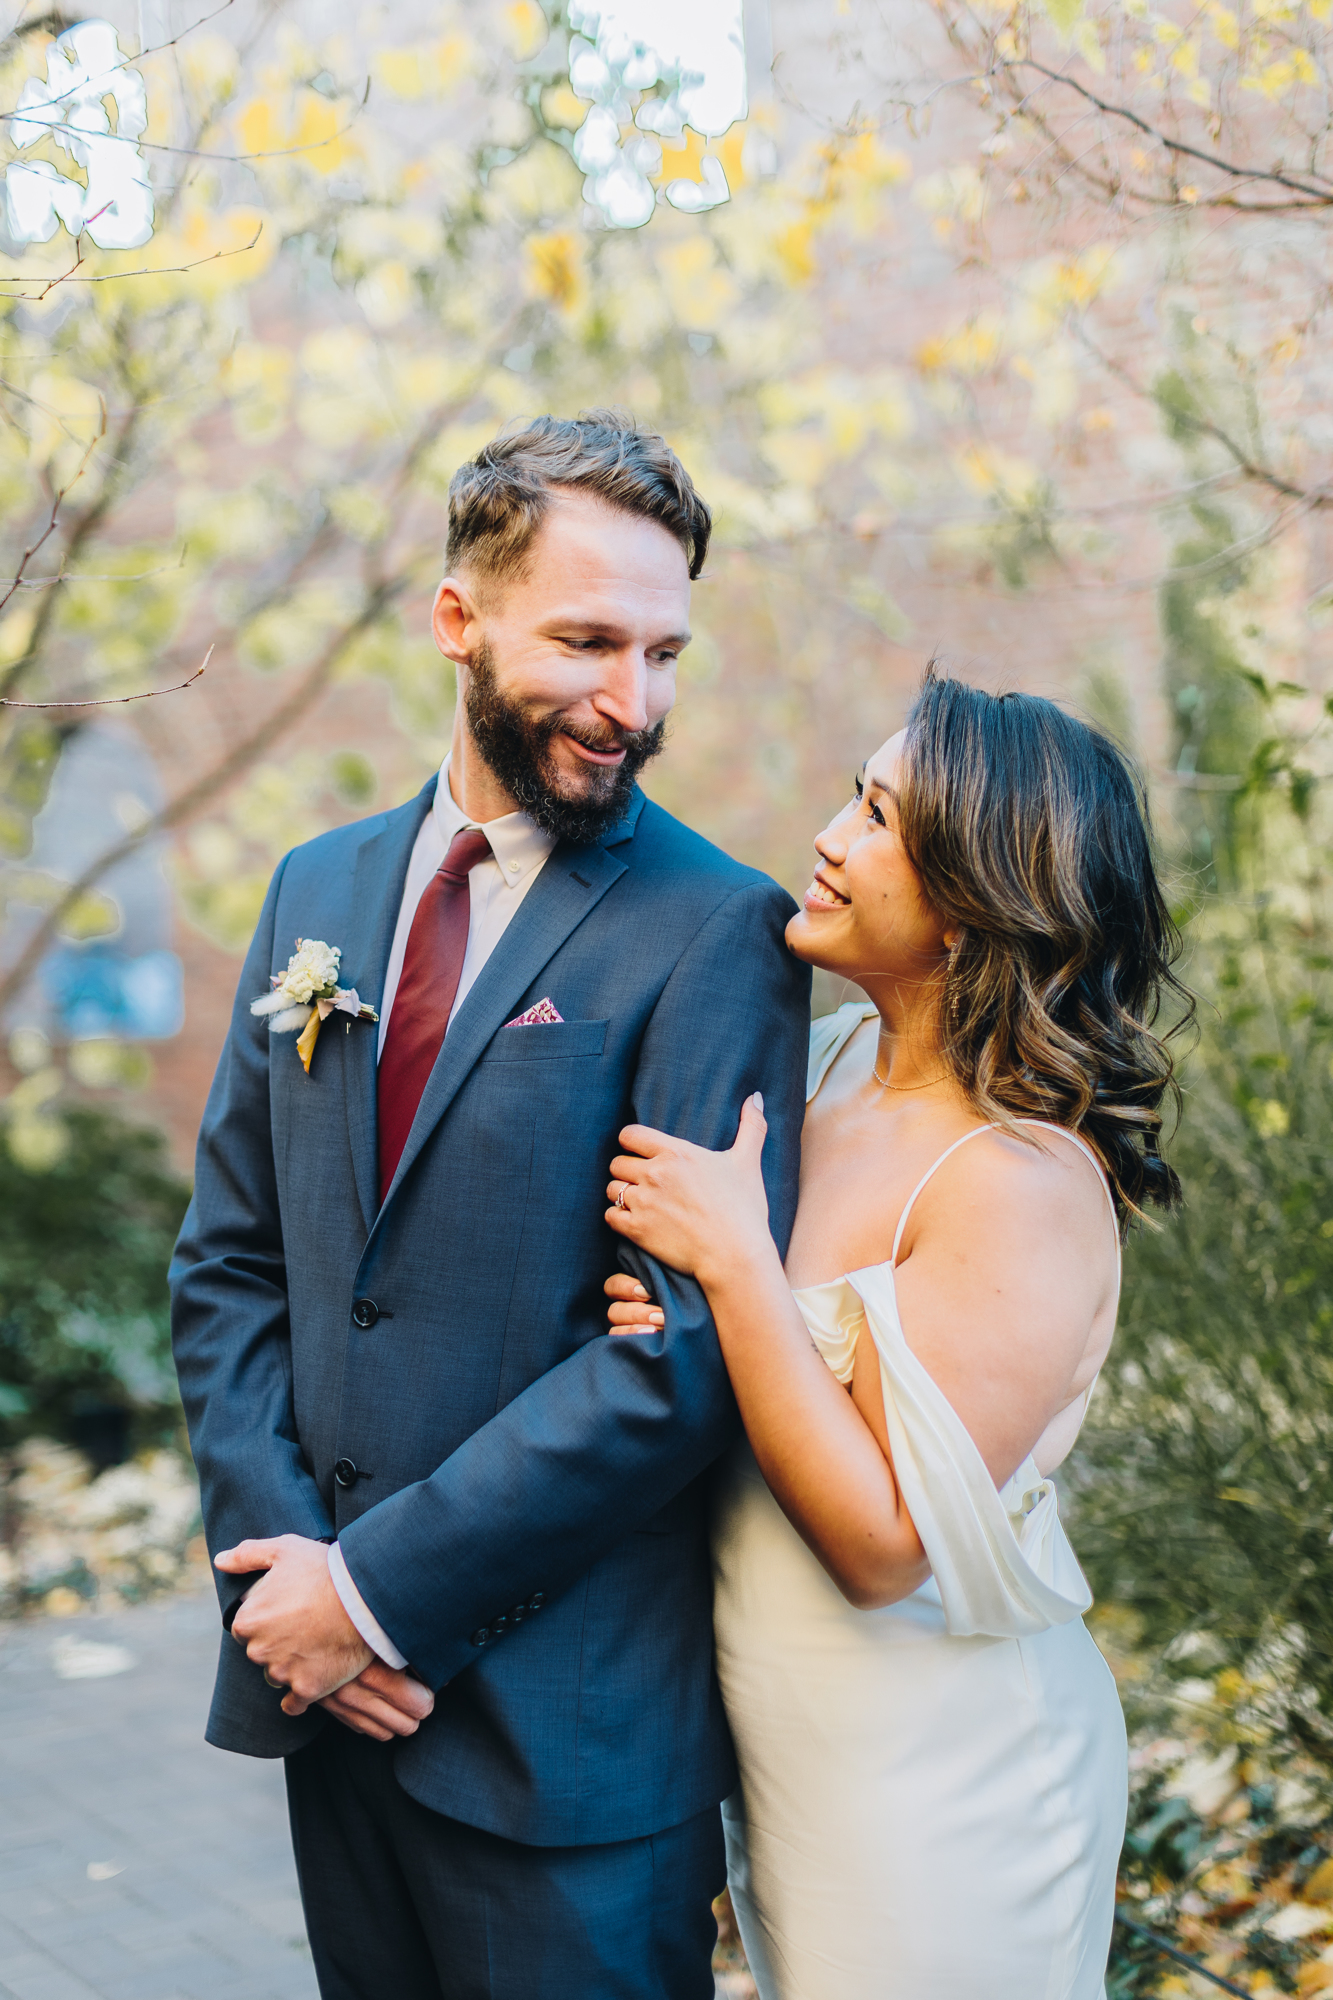 Beautiful Fall DUMBO Elopement with New York views and foliage